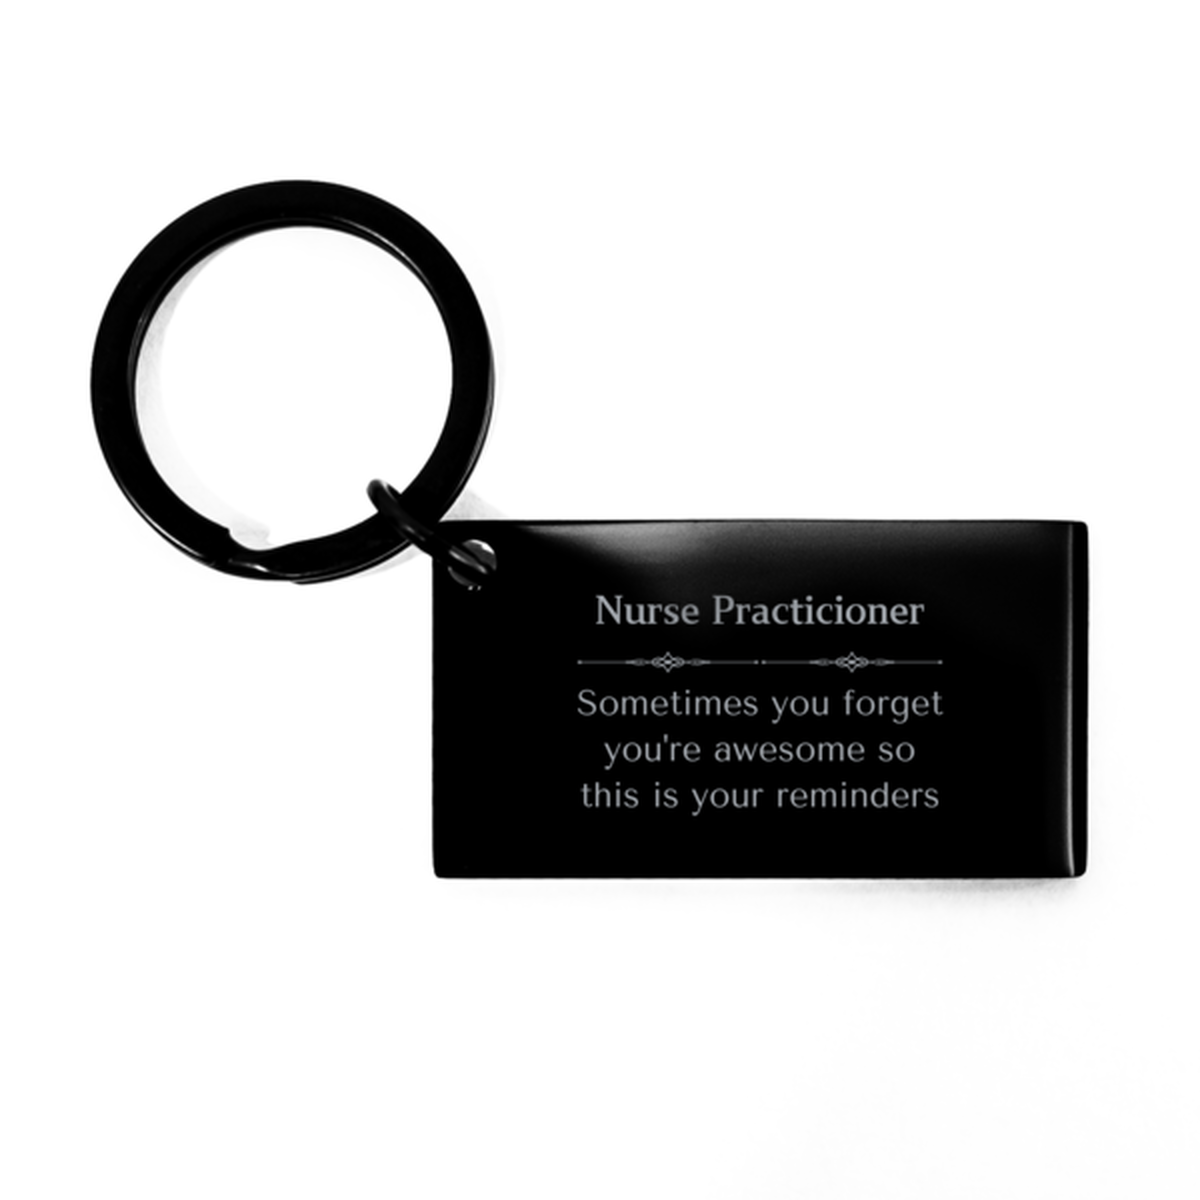 Sentimental Nurse Practicioner Keychain, Personal Trainer Sometimes you forget you're awesome so this is your reminders, Graduation Christmas Birthday Gifts for Nurse Practicioner, Men, Women, Coworkers